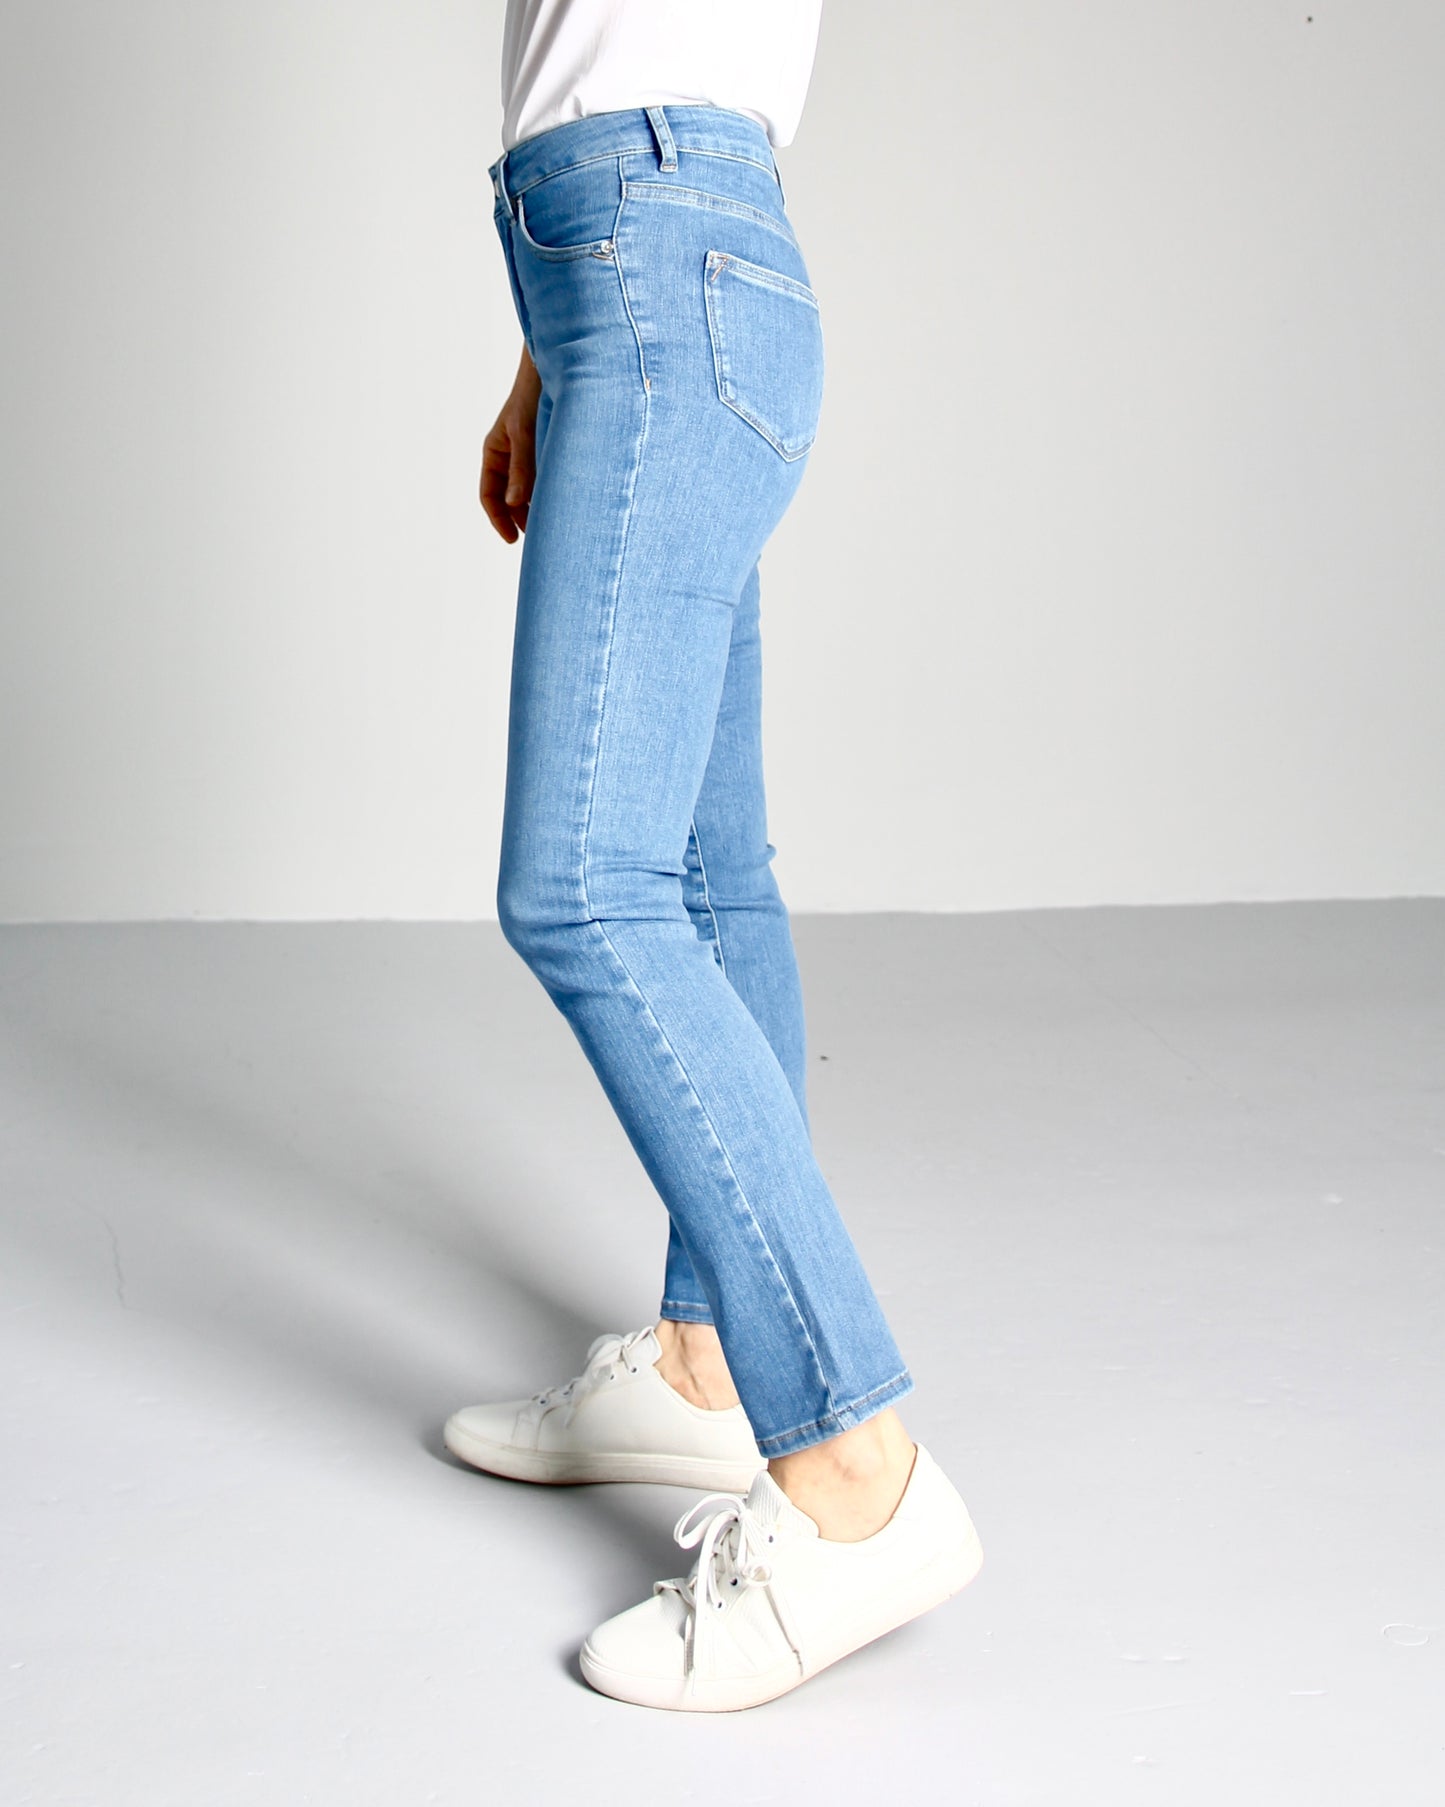 NY - Emma Riviera blue Jeans - Dame - Tailored  - High waist - Stretchy